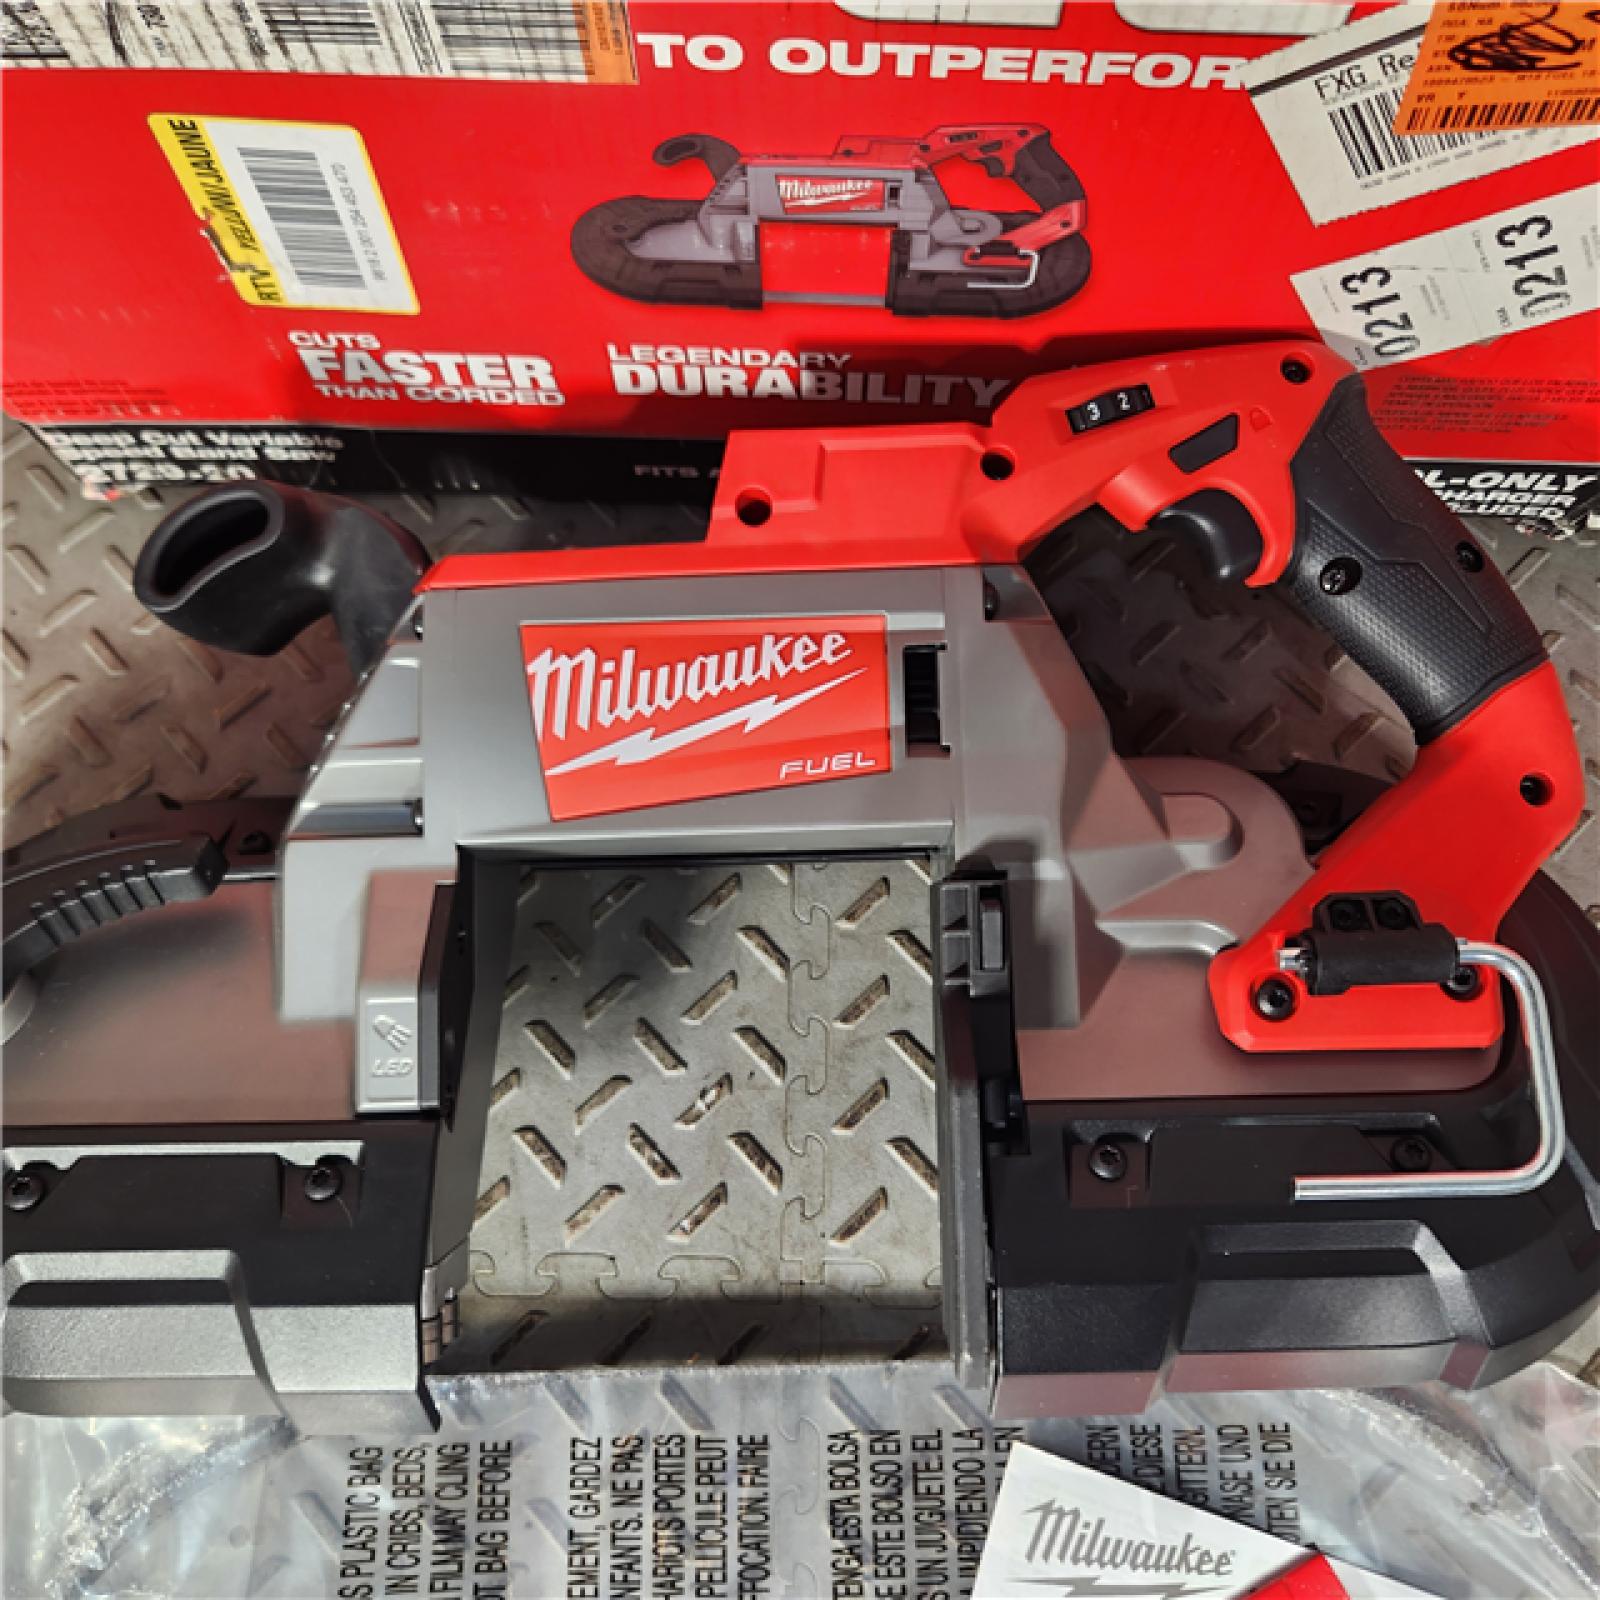 Houston Location- AS-IS Milwaukee 2729-20 - M18 Fuel 18V Cordless Brushless Band Saw Bare Tool -APPEARS IN GOOD CONDITION